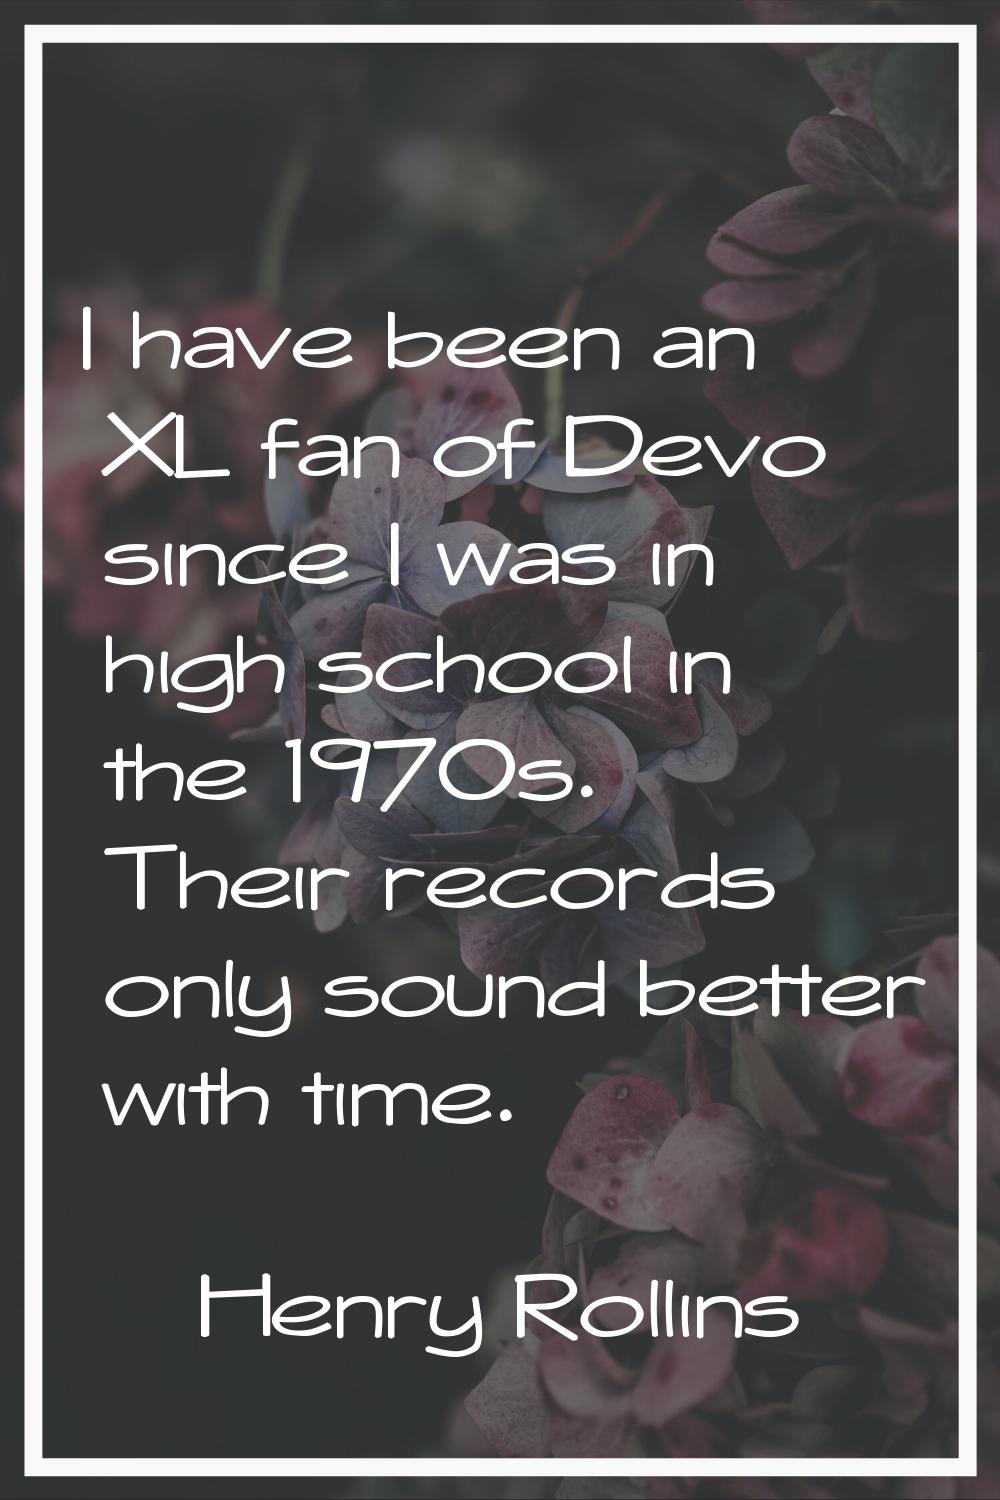 I have been an XL fan of Devo since I was in high school in the 1970s. Their records only sound bet